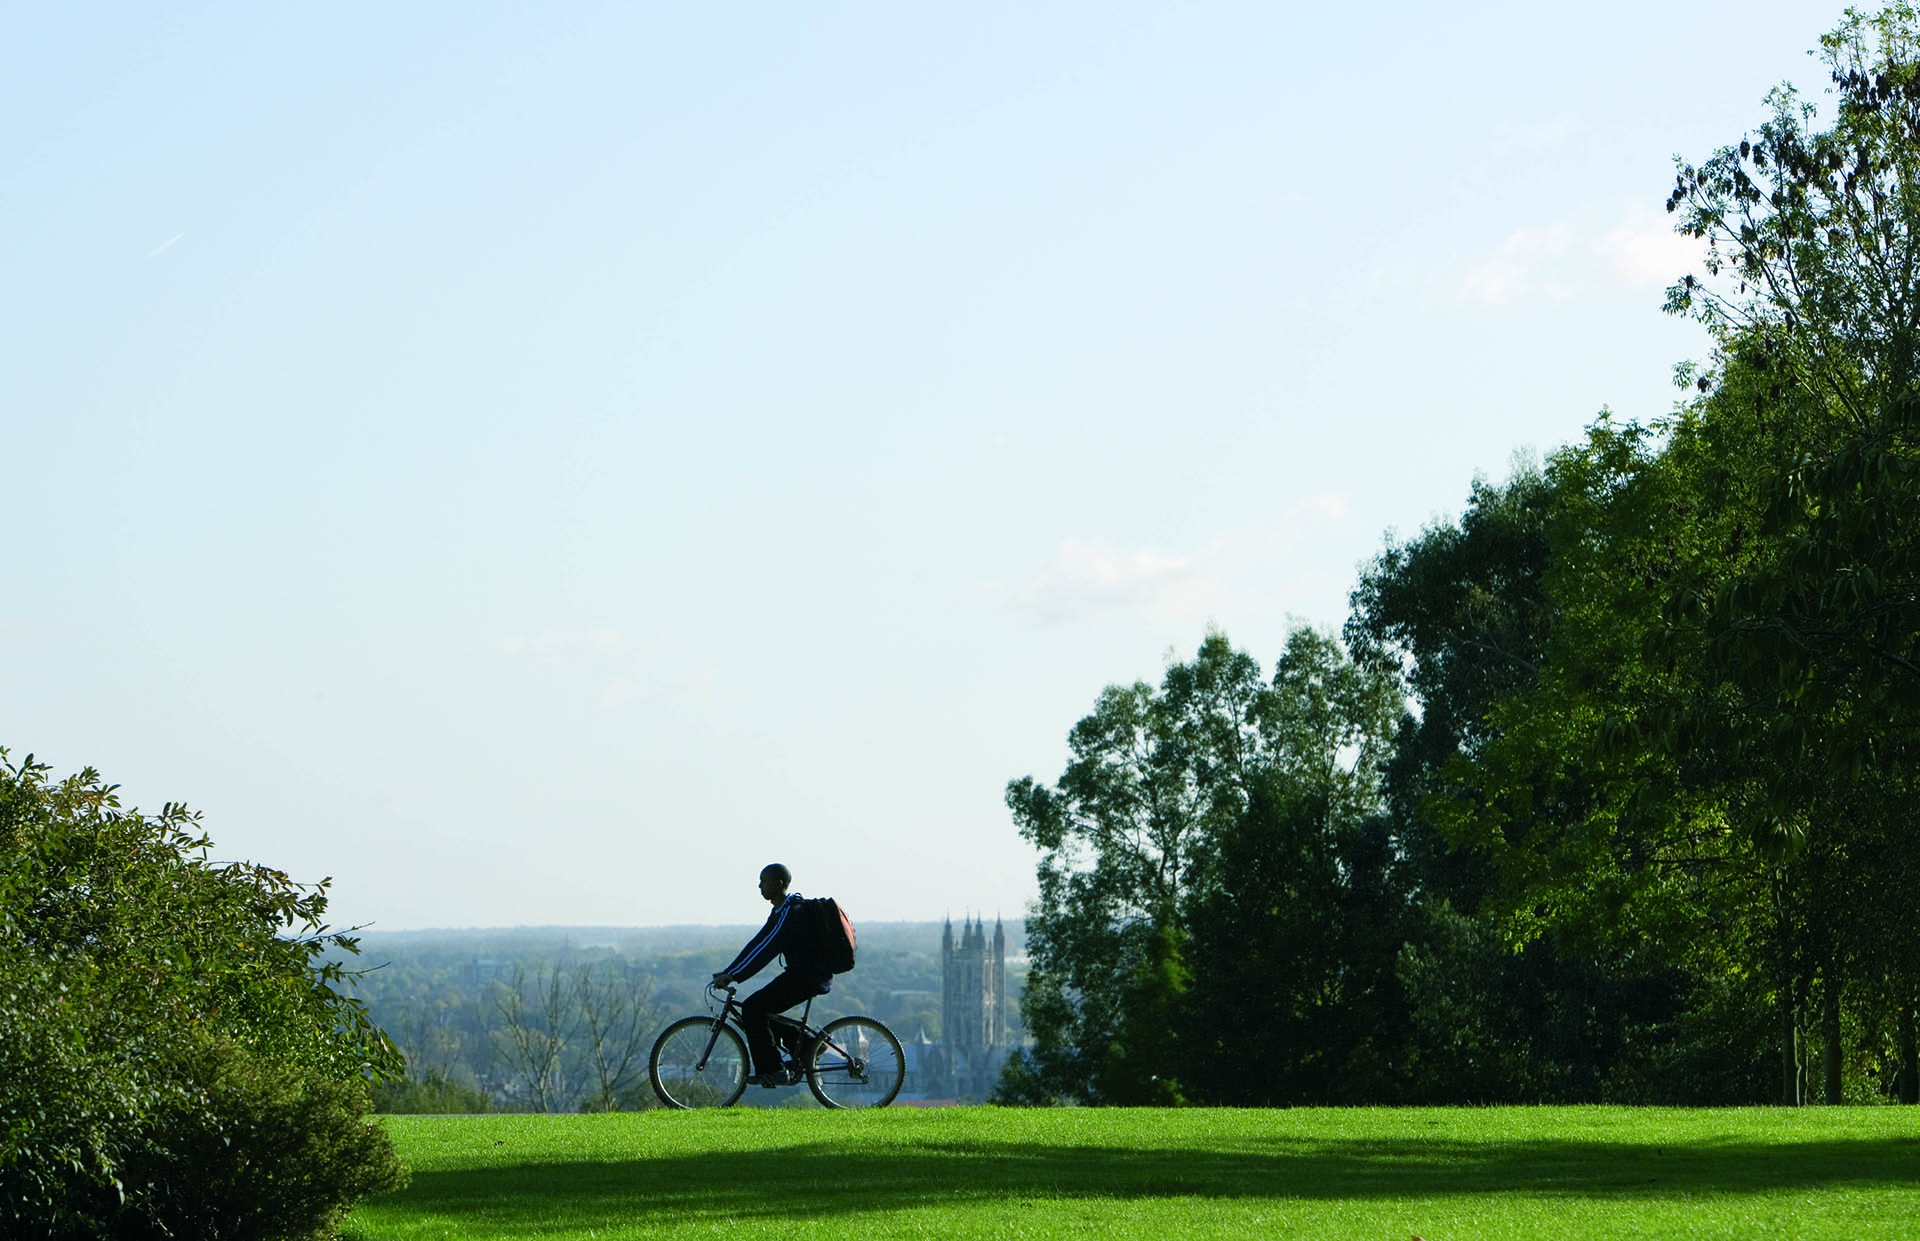 Man cycling on Canterbury campus with Canterbury cathedral in background